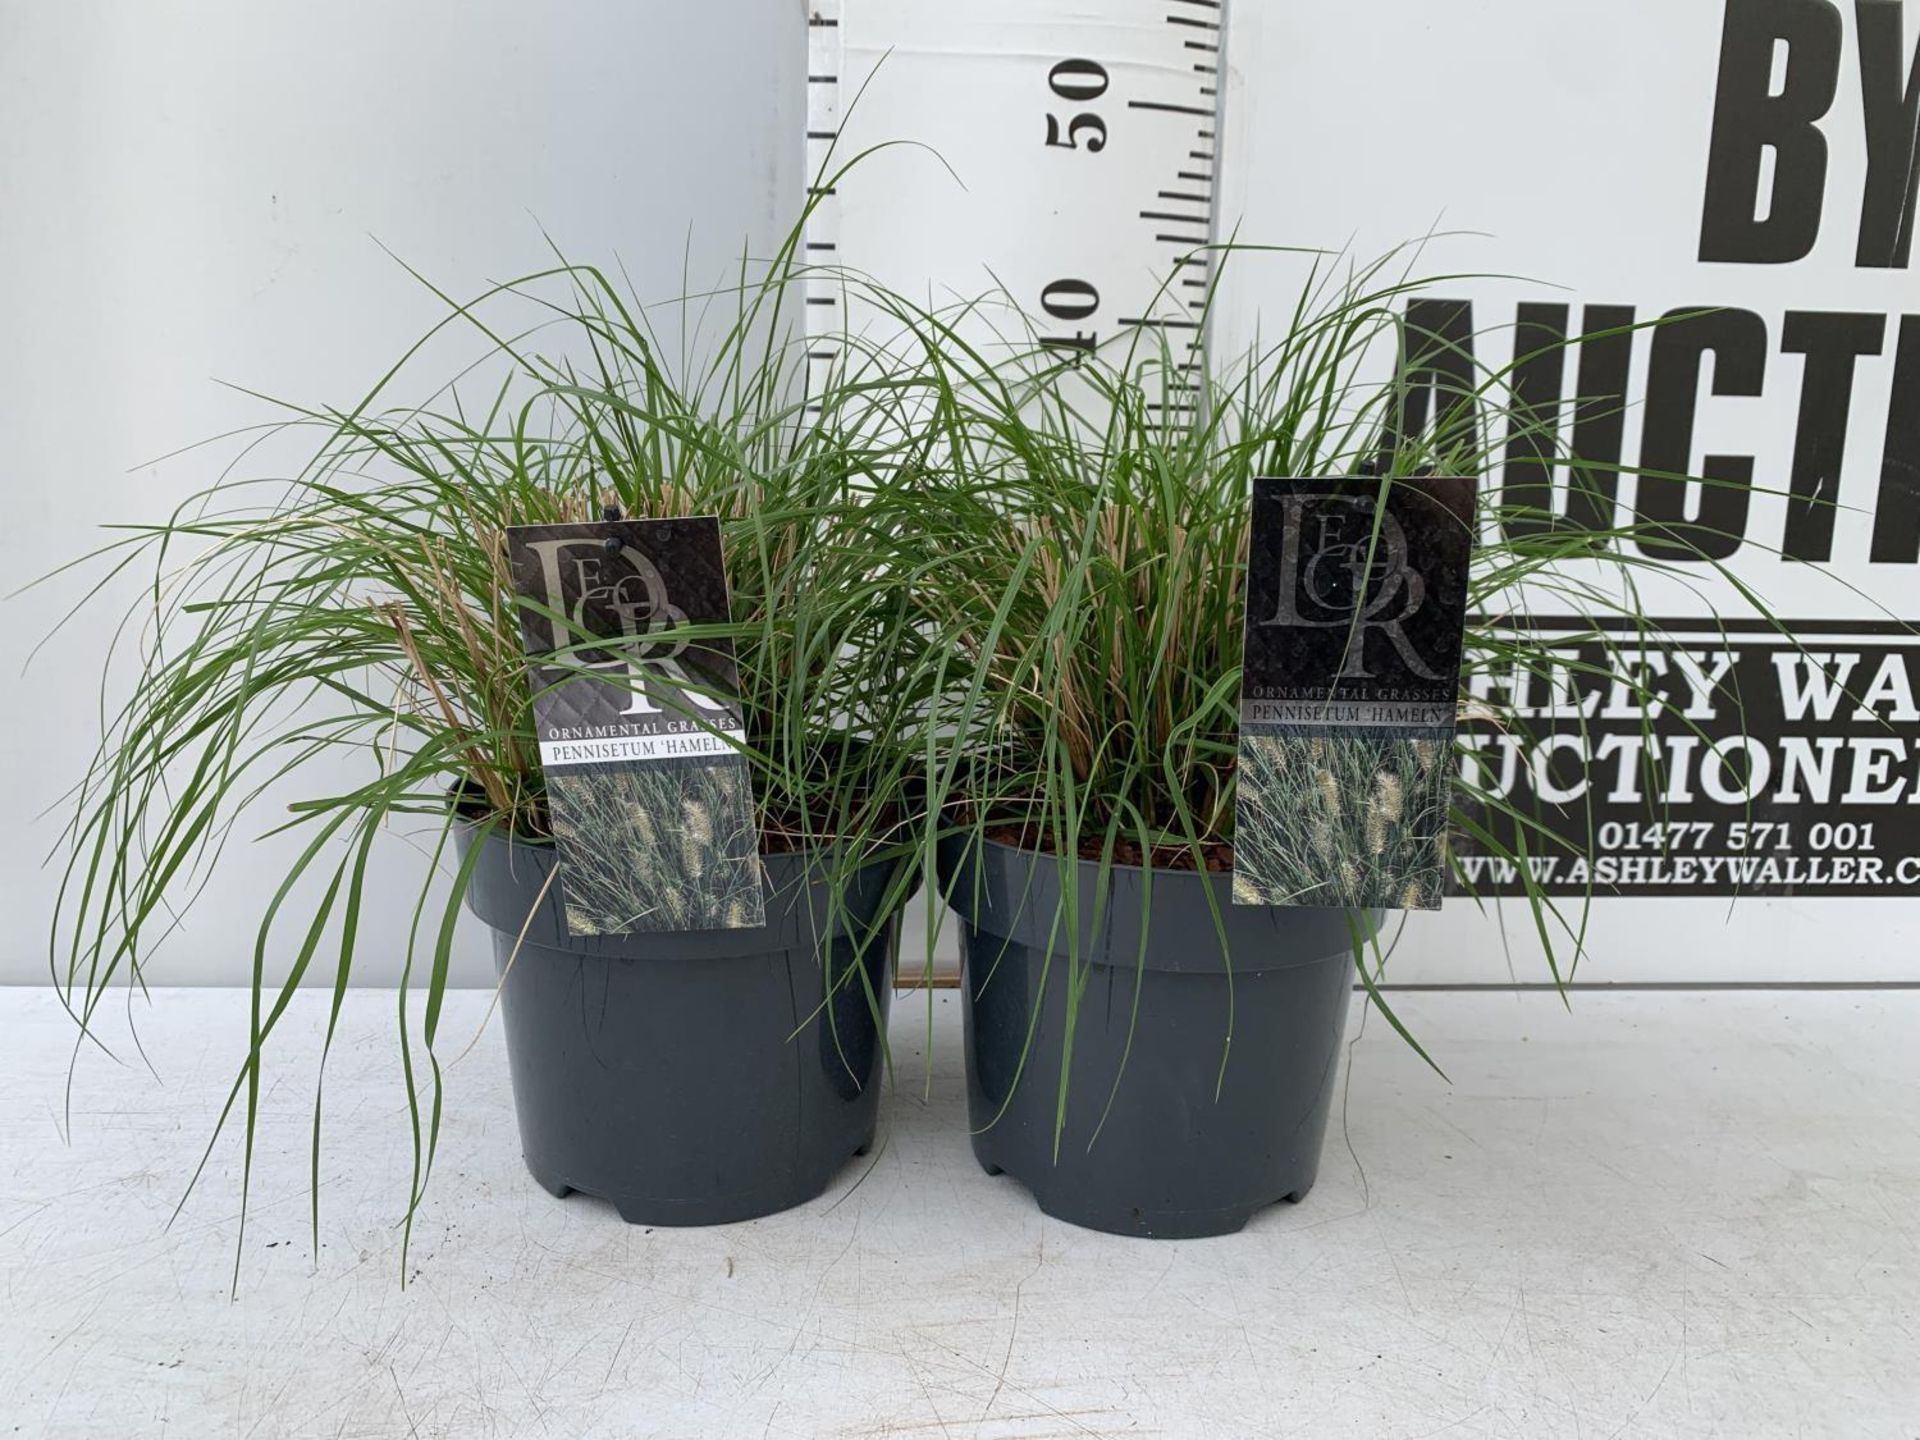 TWO ORNAMENTAL GRASSES PENNISETUM 'HAMELN' APPROX 45CM IN HEIGHT IN 4 LTR POTS PLUS VAT TO BE SOLD - Image 2 of 8